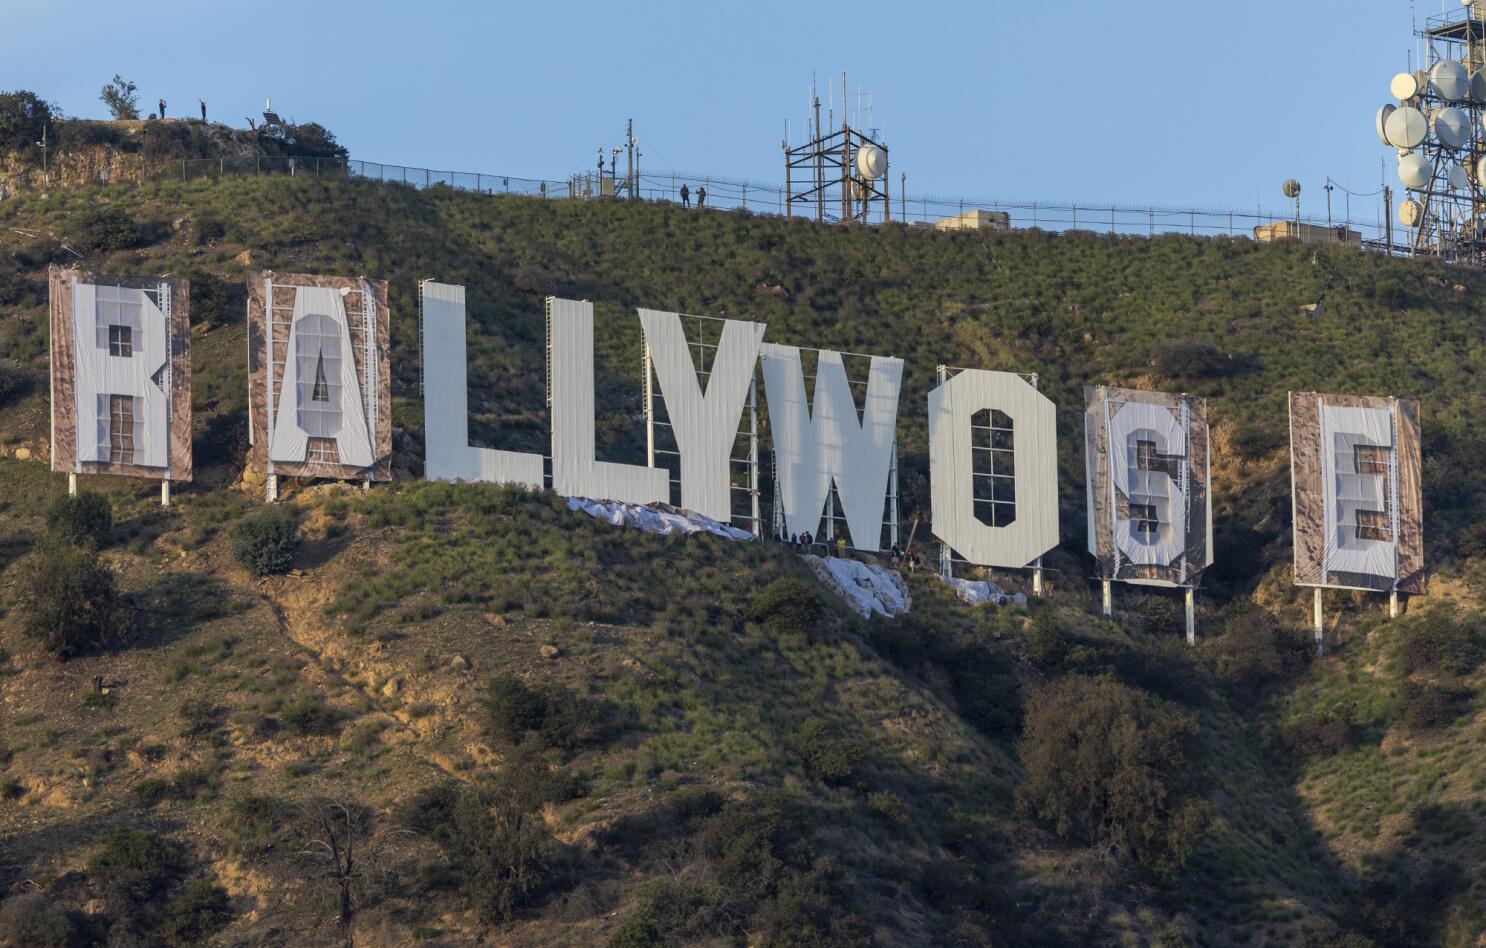 The Hollywood sign will be 'Rams House' this week - Los Angeles Times